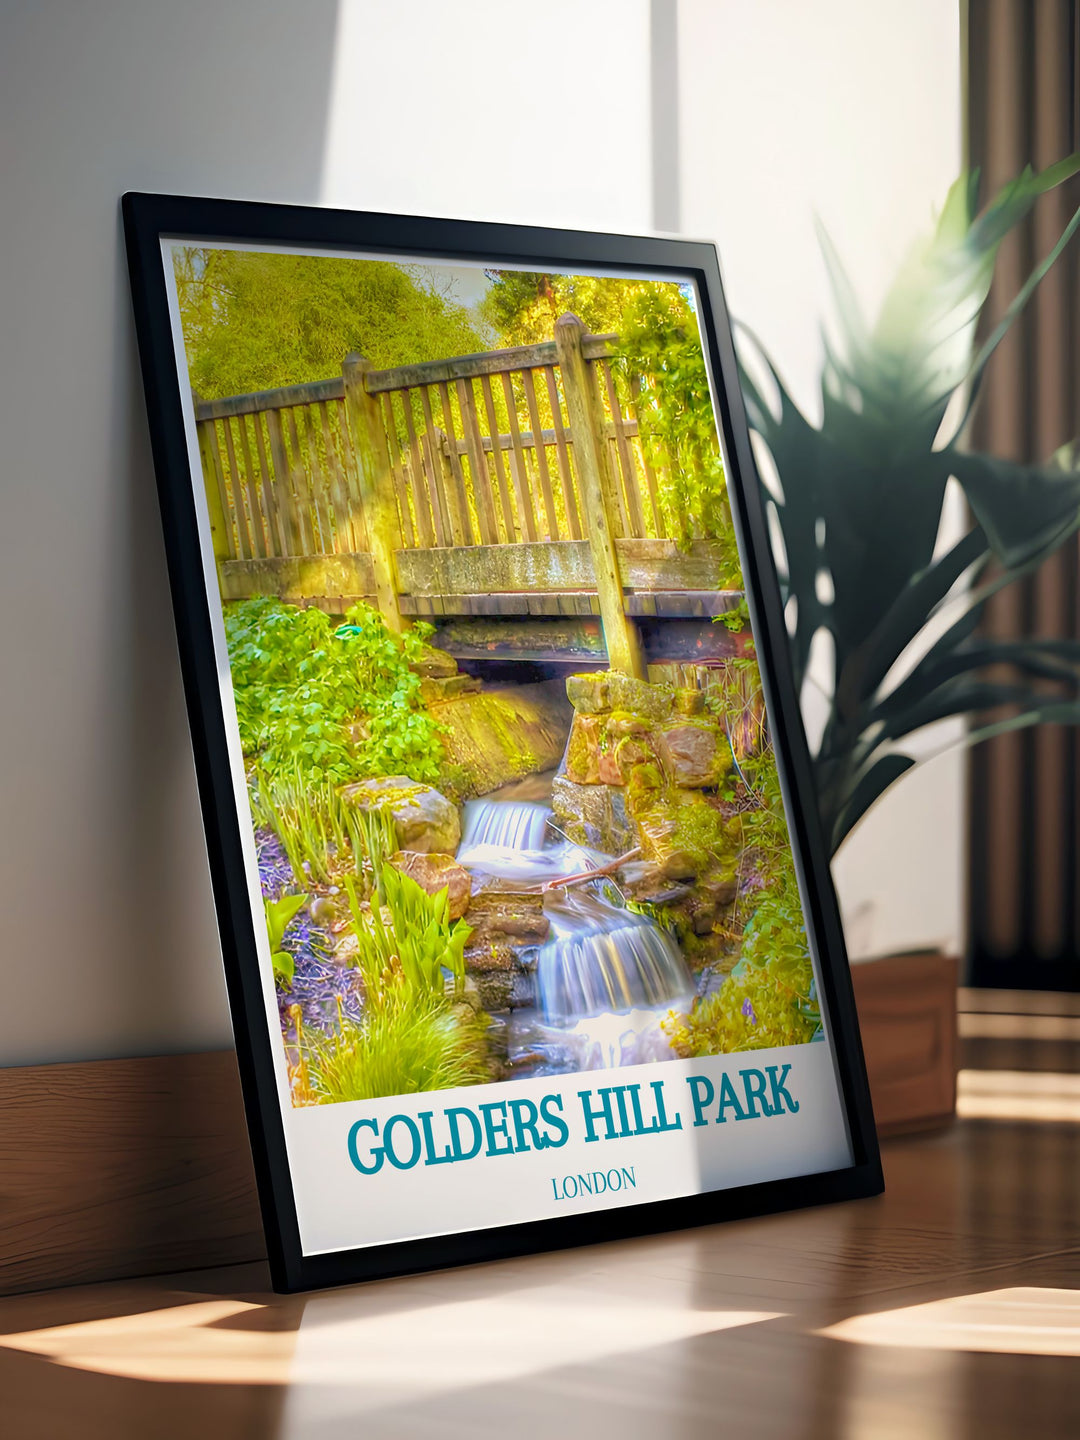 Canvas art featuring Londons Golders Hill Park, with vibrant flowerbeds and the tranquil Water Gardens, perfect for bringing a touch of nature into your living space.